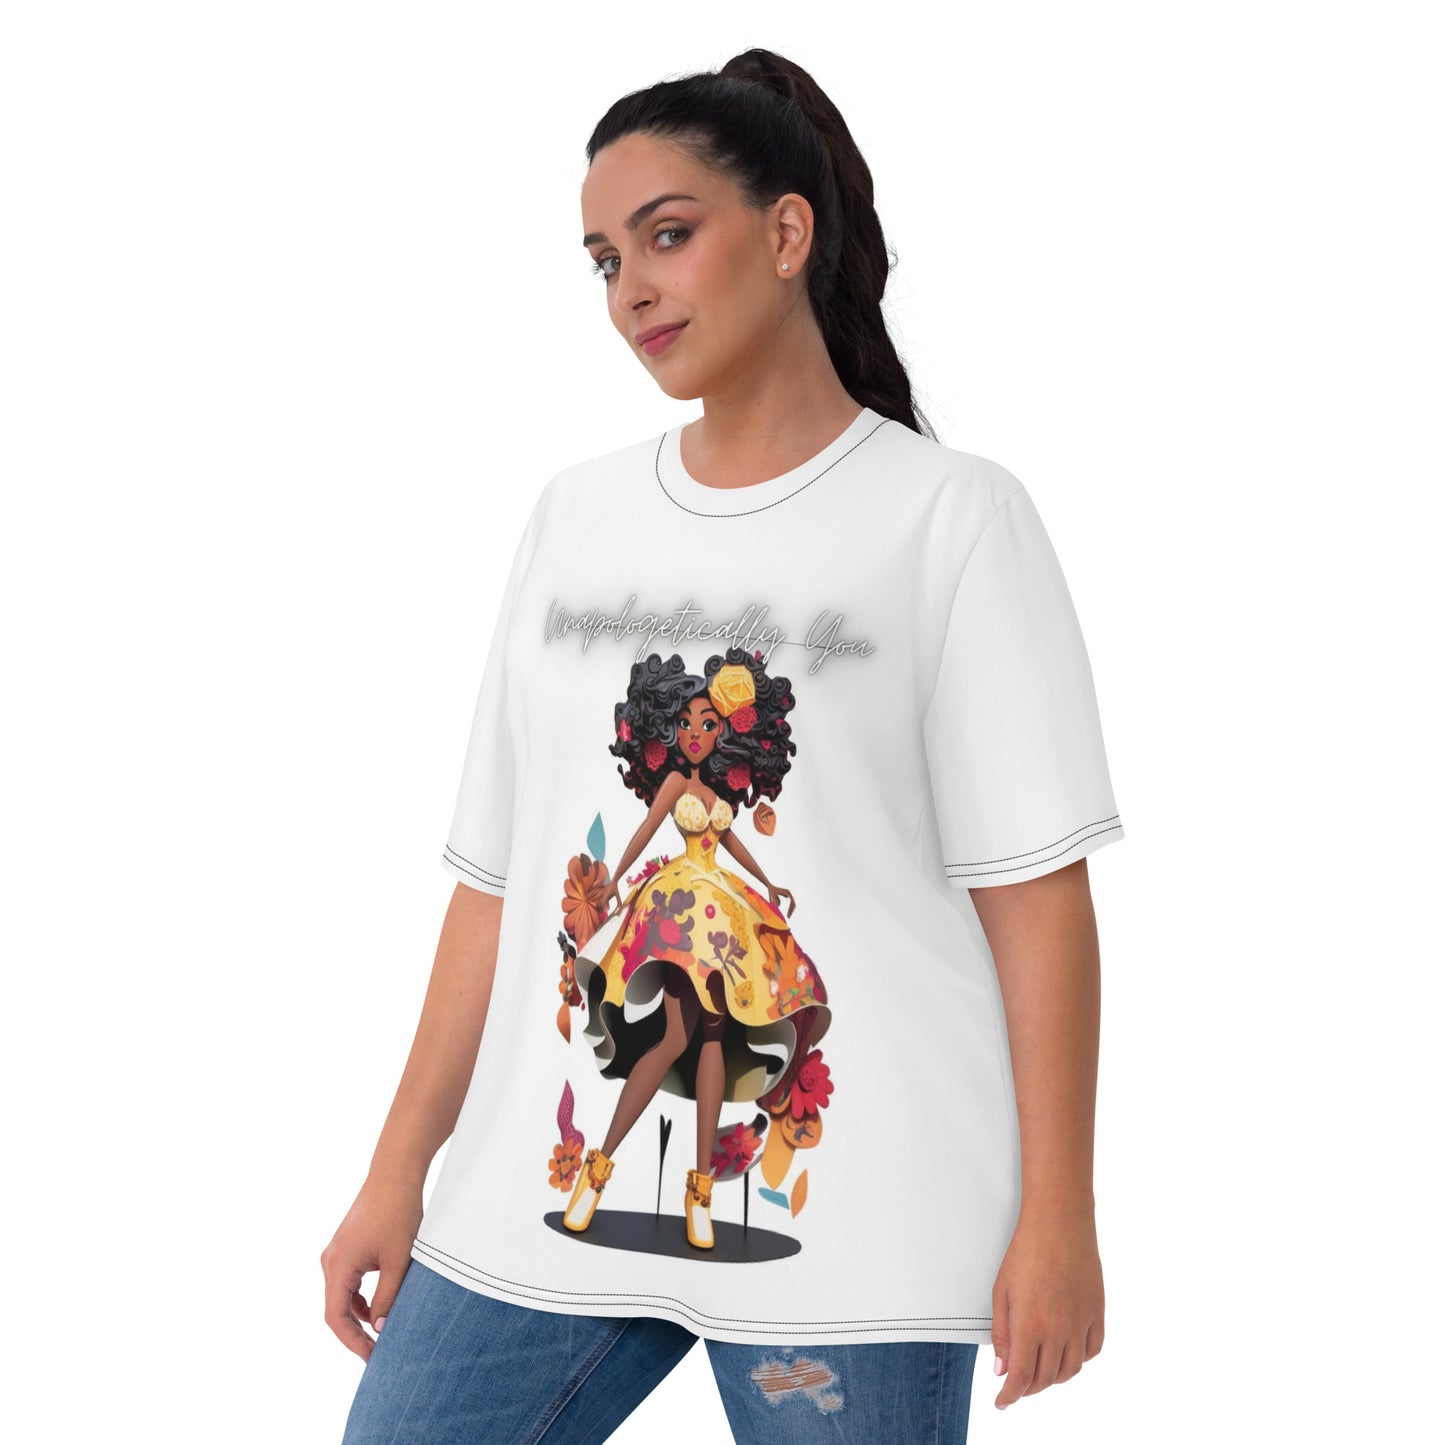 Unapologetically 2 Women's T-shirt